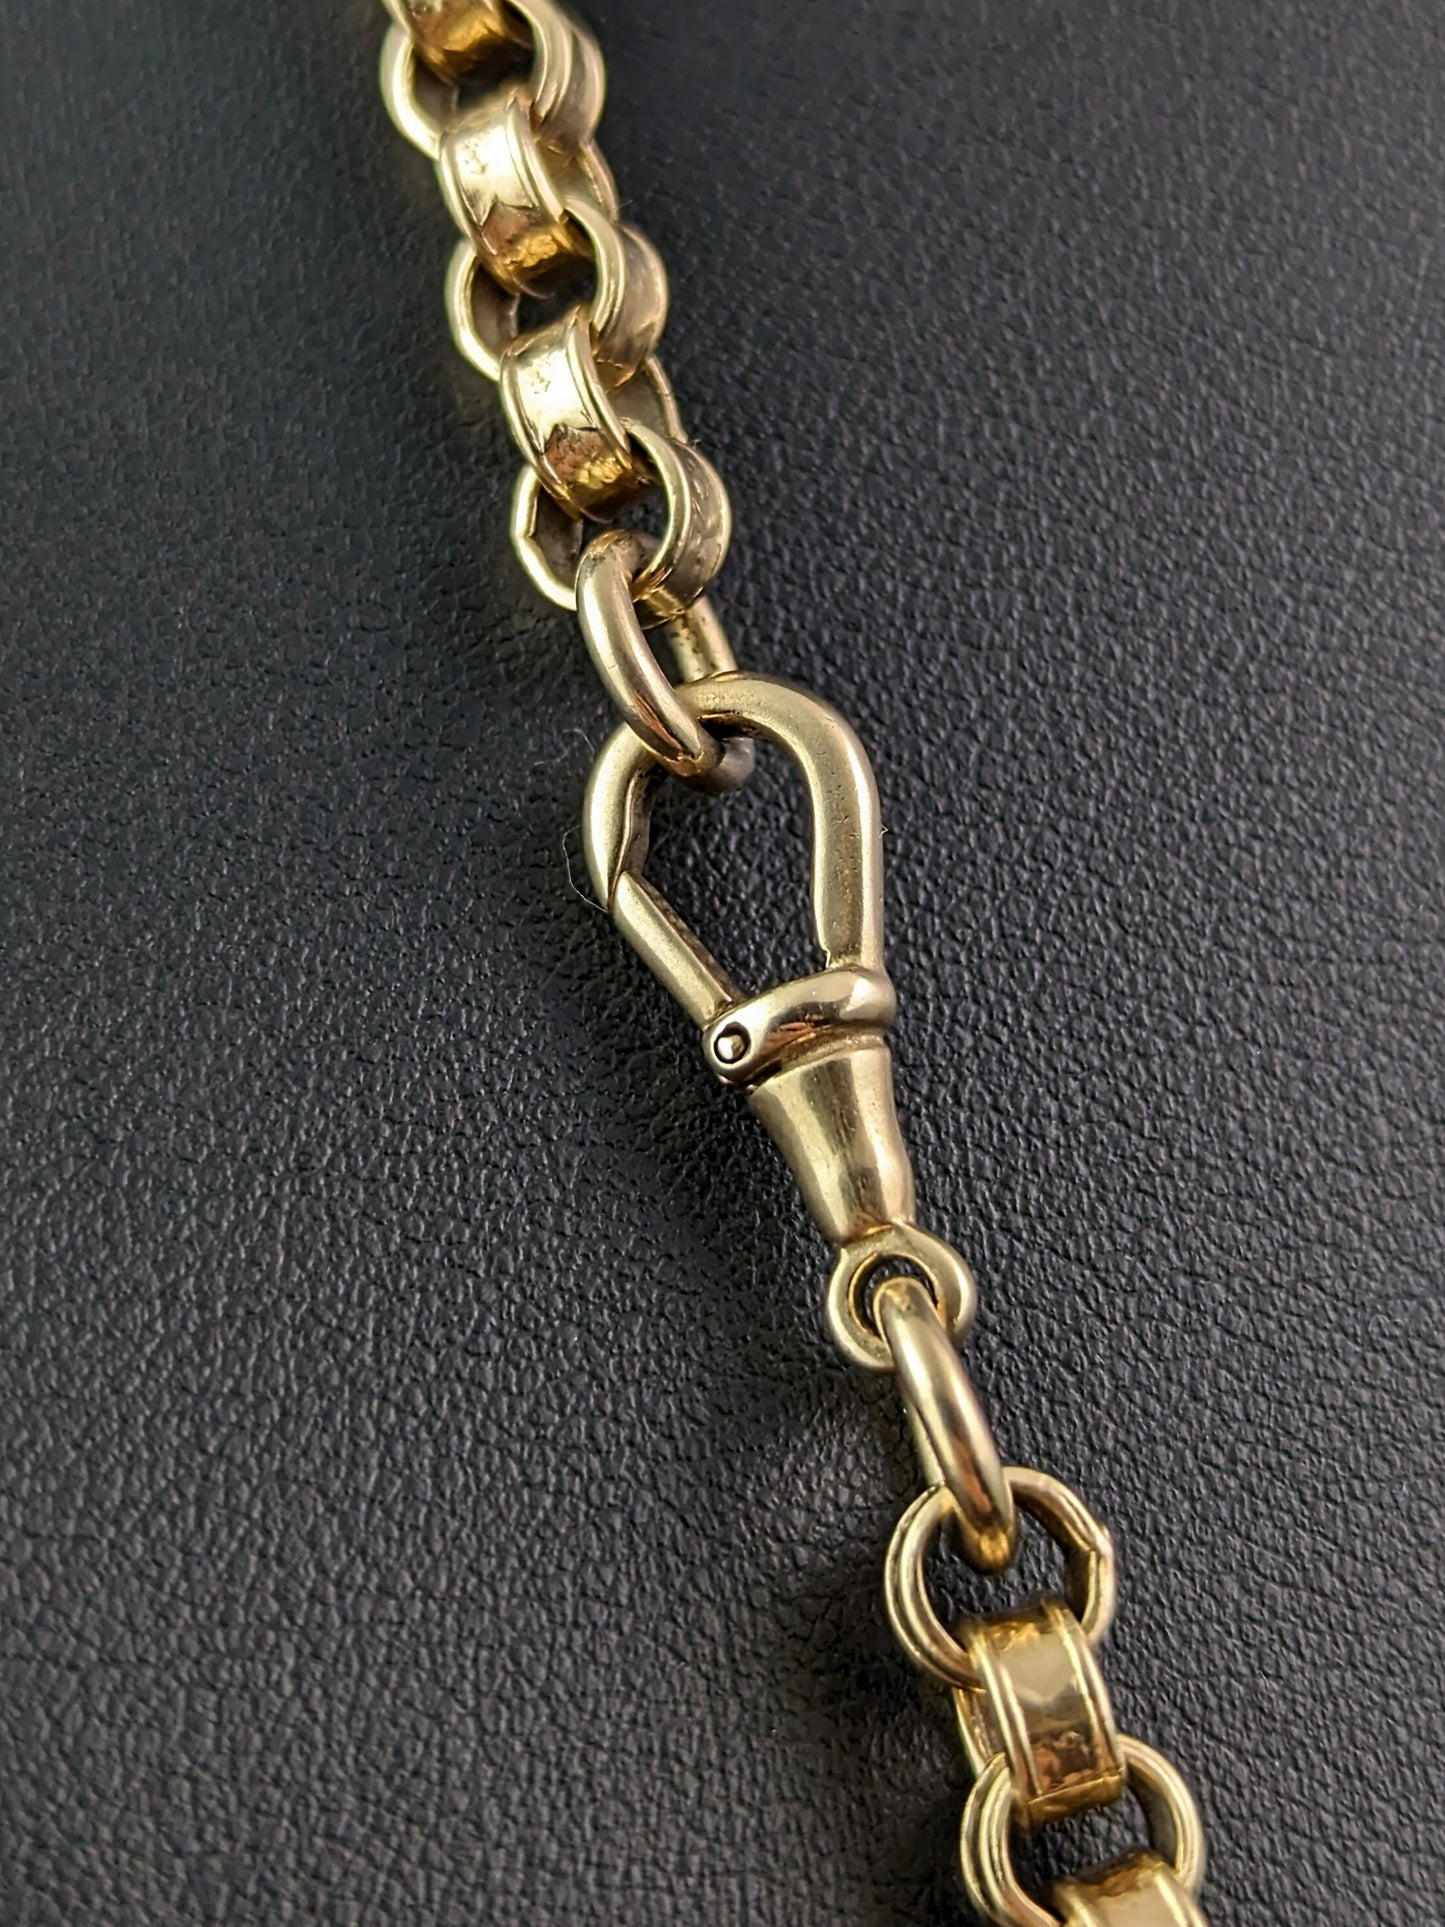 Antique 9ct gold Fancy rolo link chain necklace, Victorian